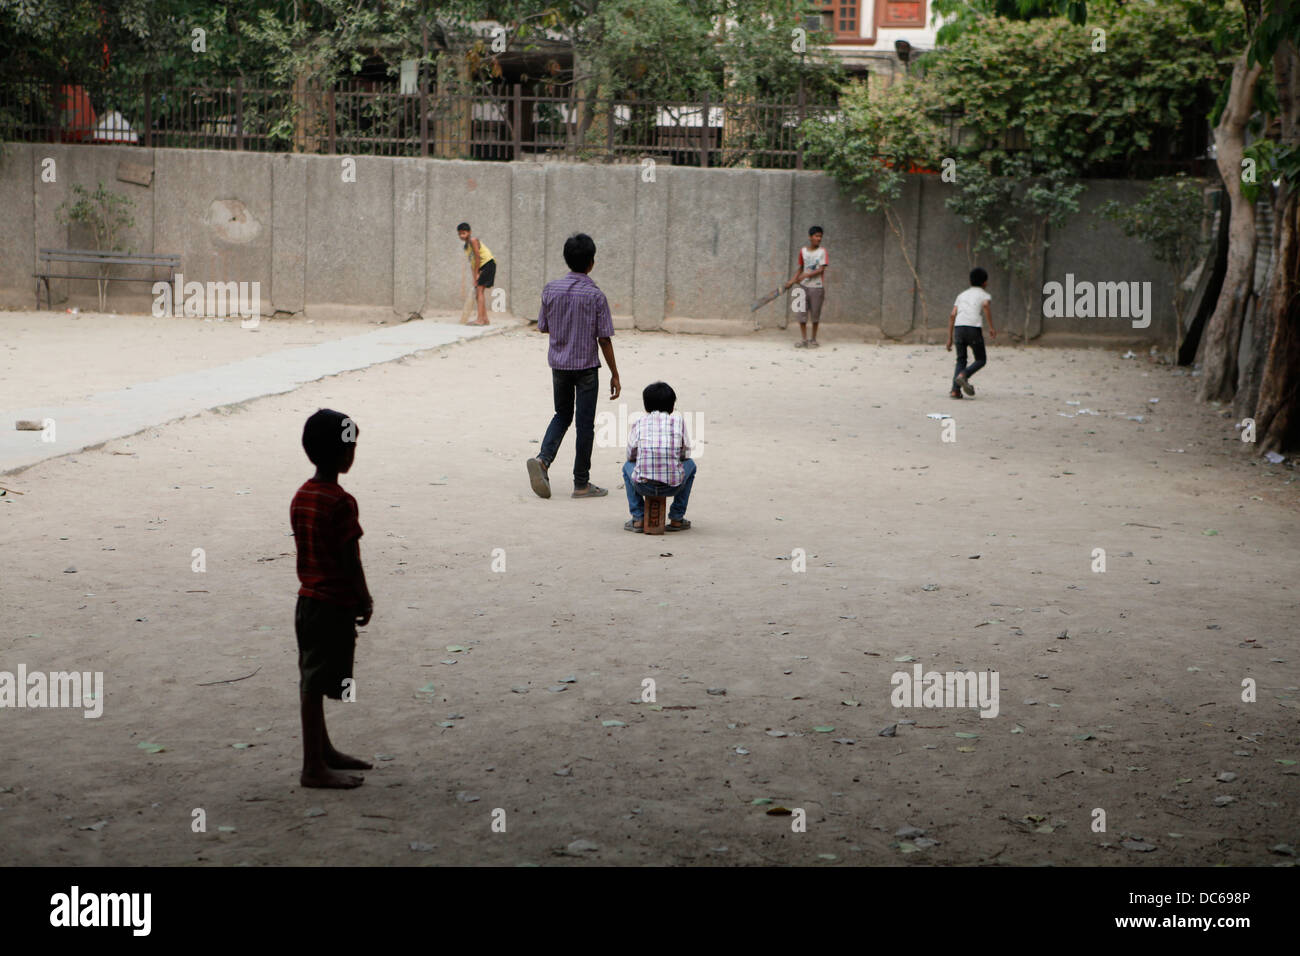 A group of young boys play street cricket on a Sunday afternoon. Stock Photo